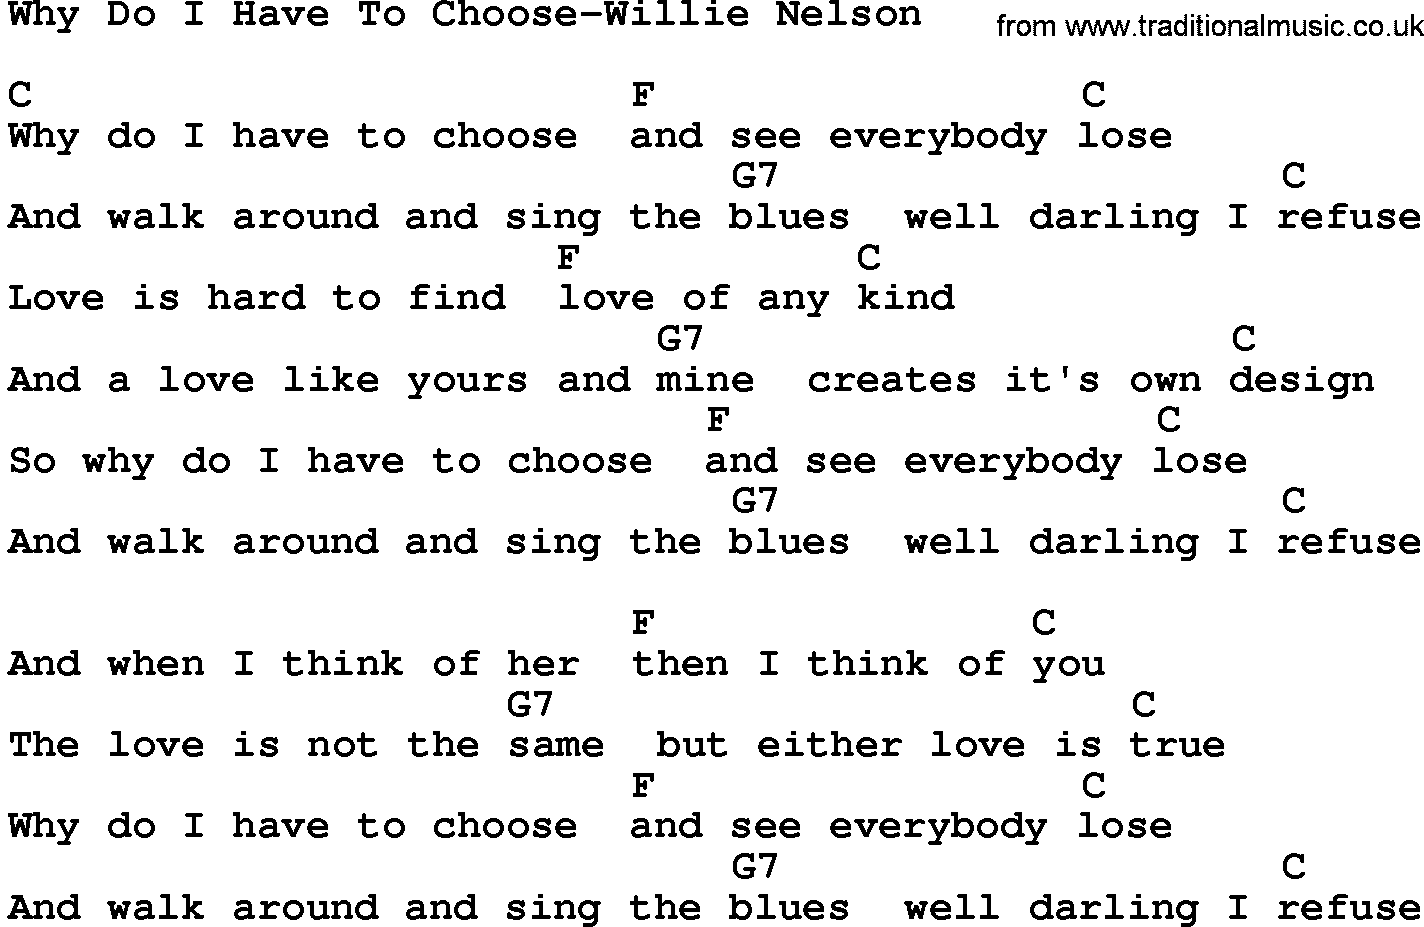 Country music song: Why Do I Have To Choose-Willie Nelson lyrics and chords